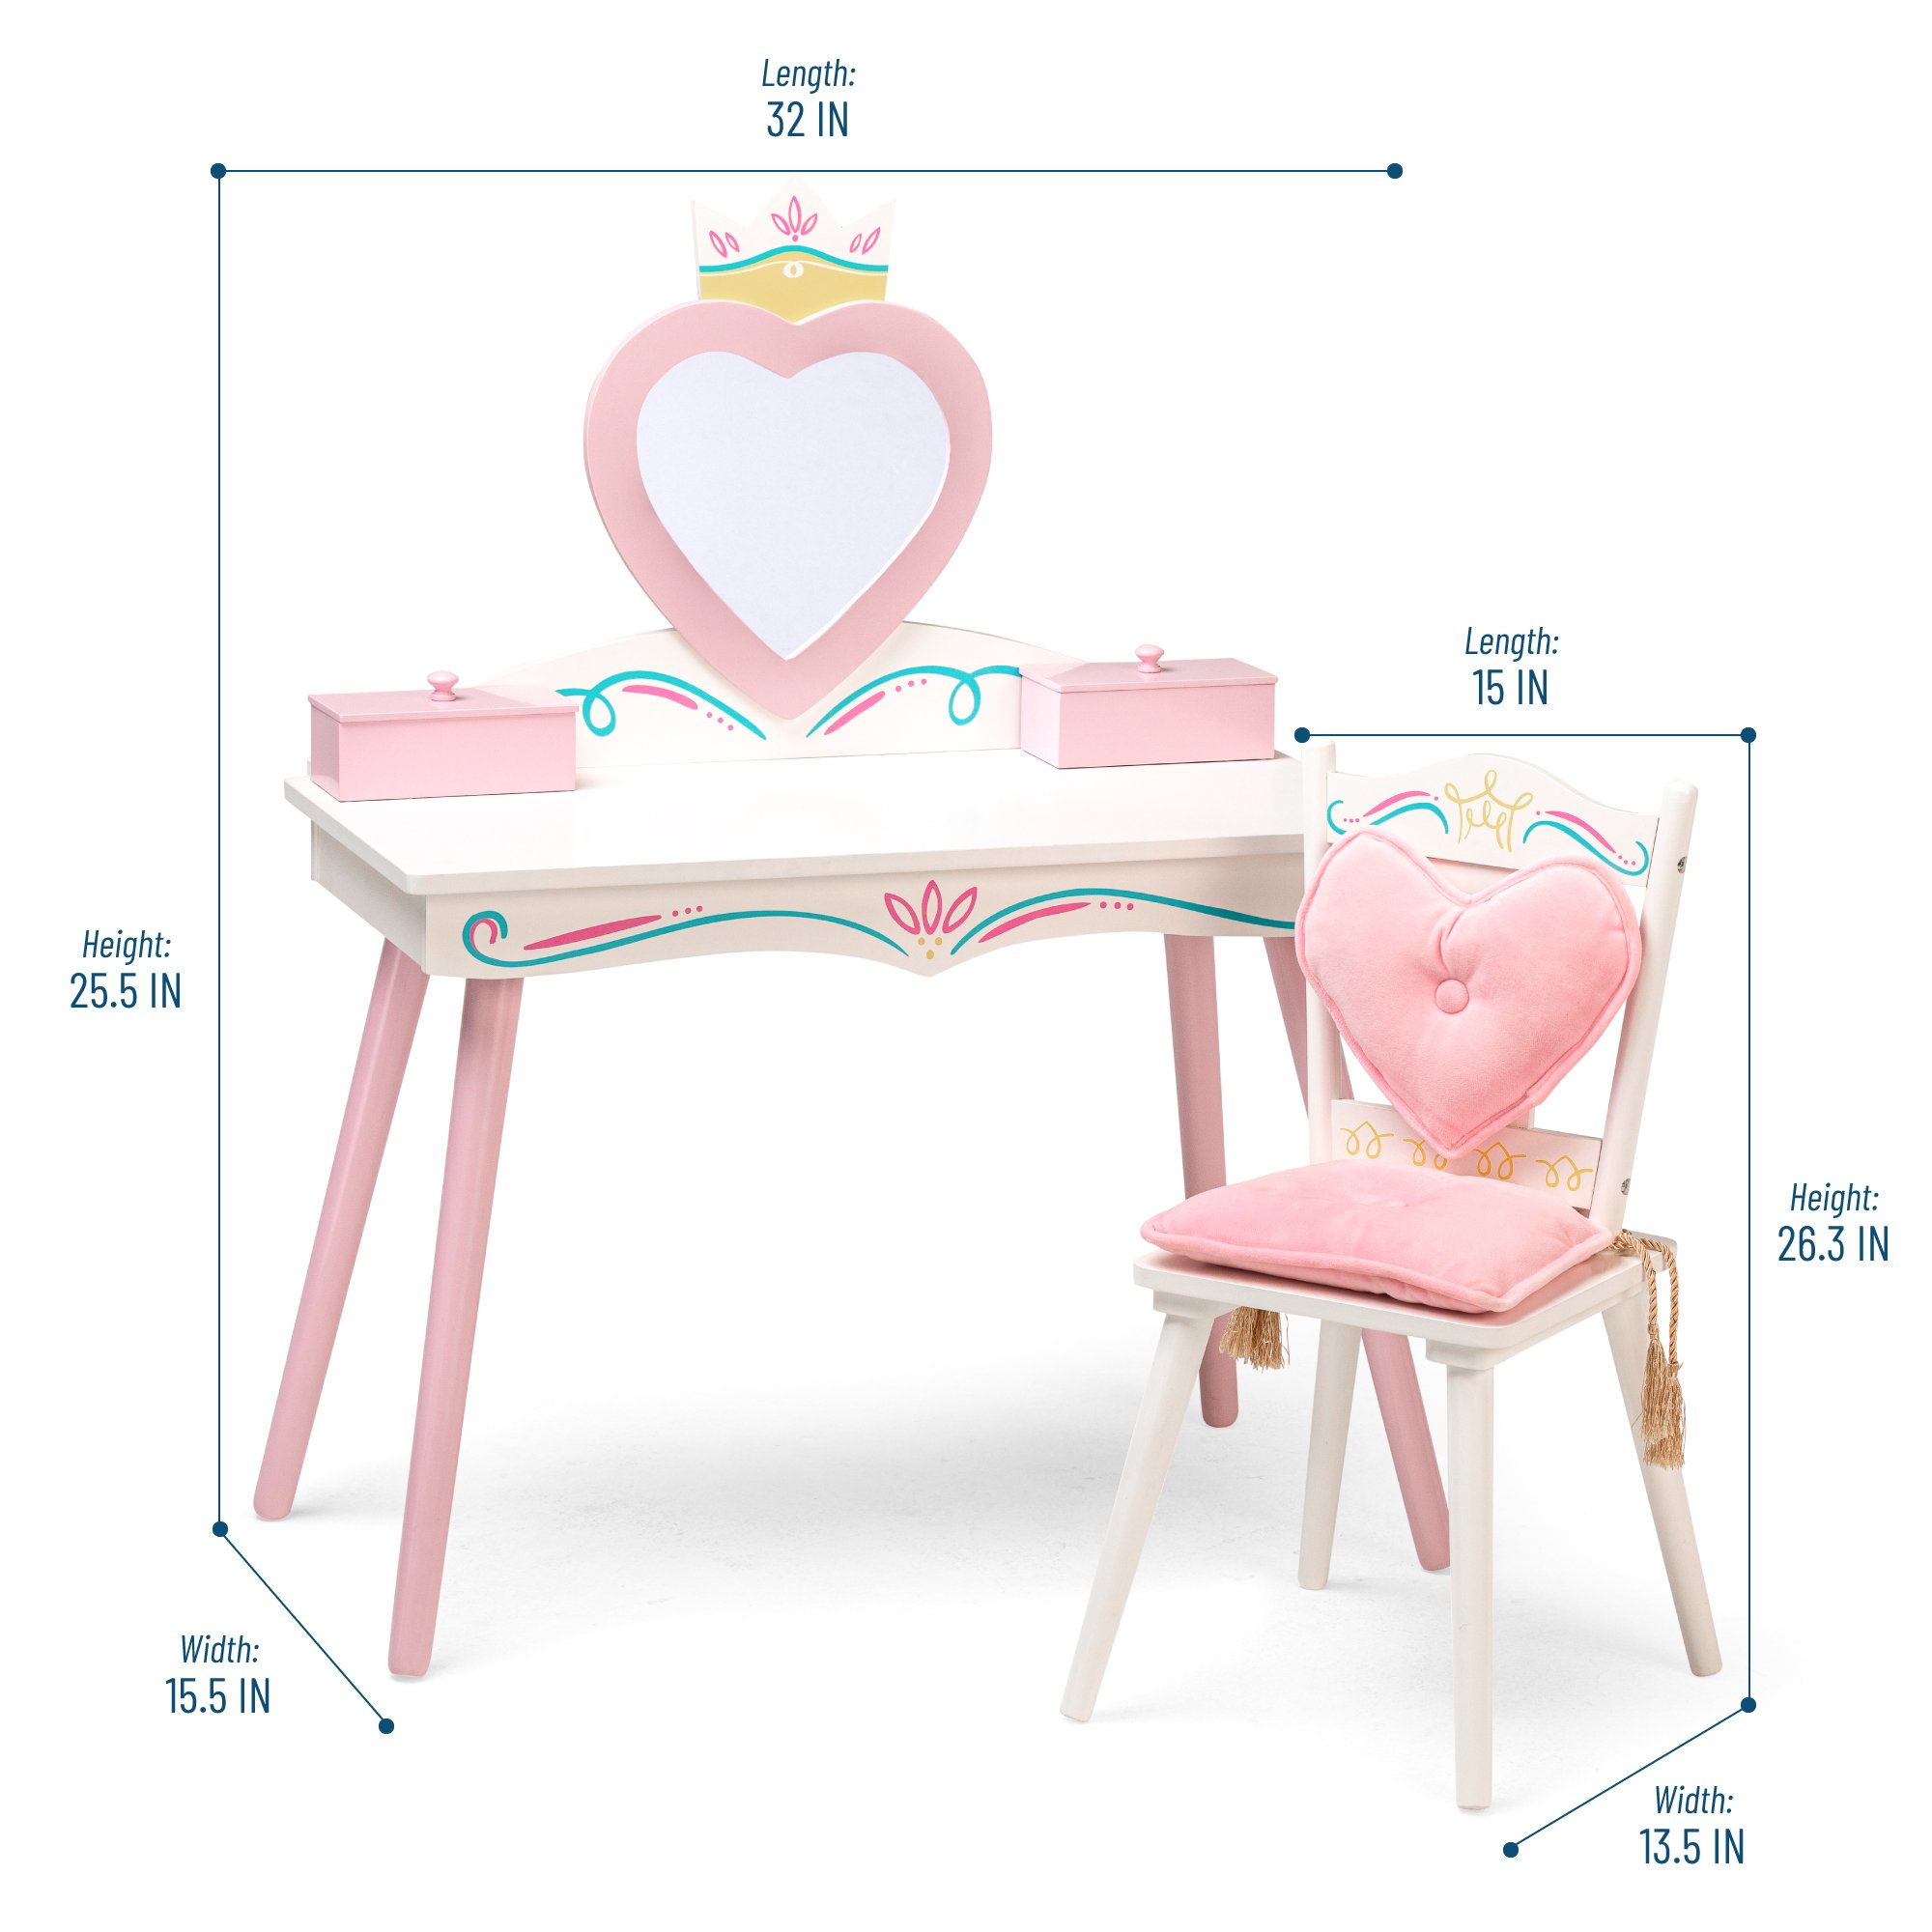 Levels of Discovery Princess Vanity Table & Chair Set